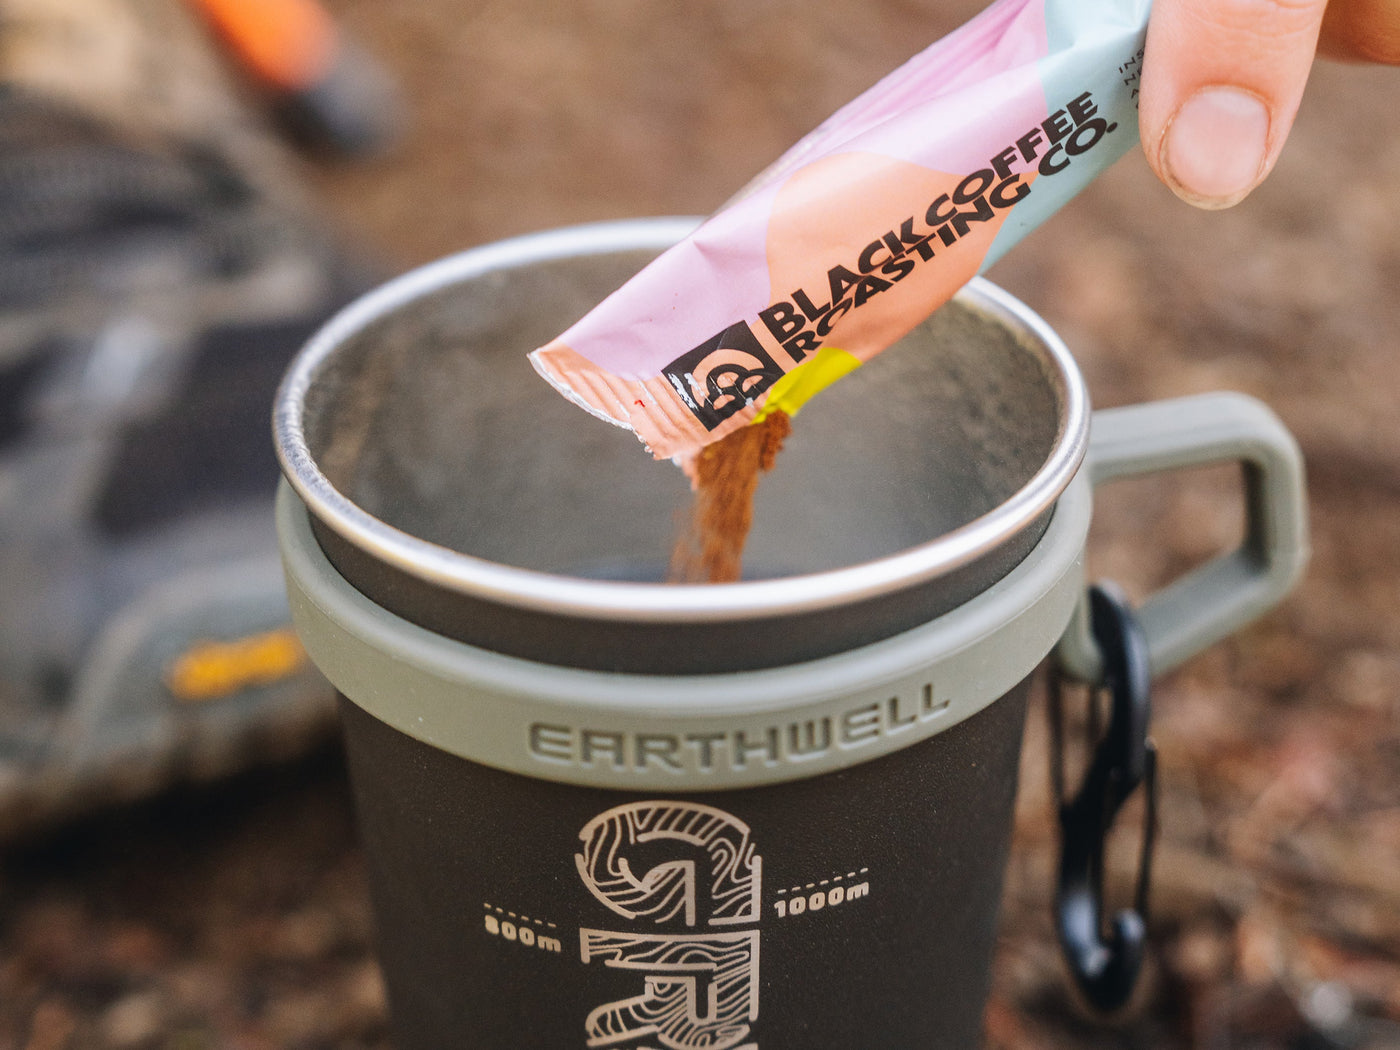 Get a FREE Camp Cup w/ Purifier Purchase